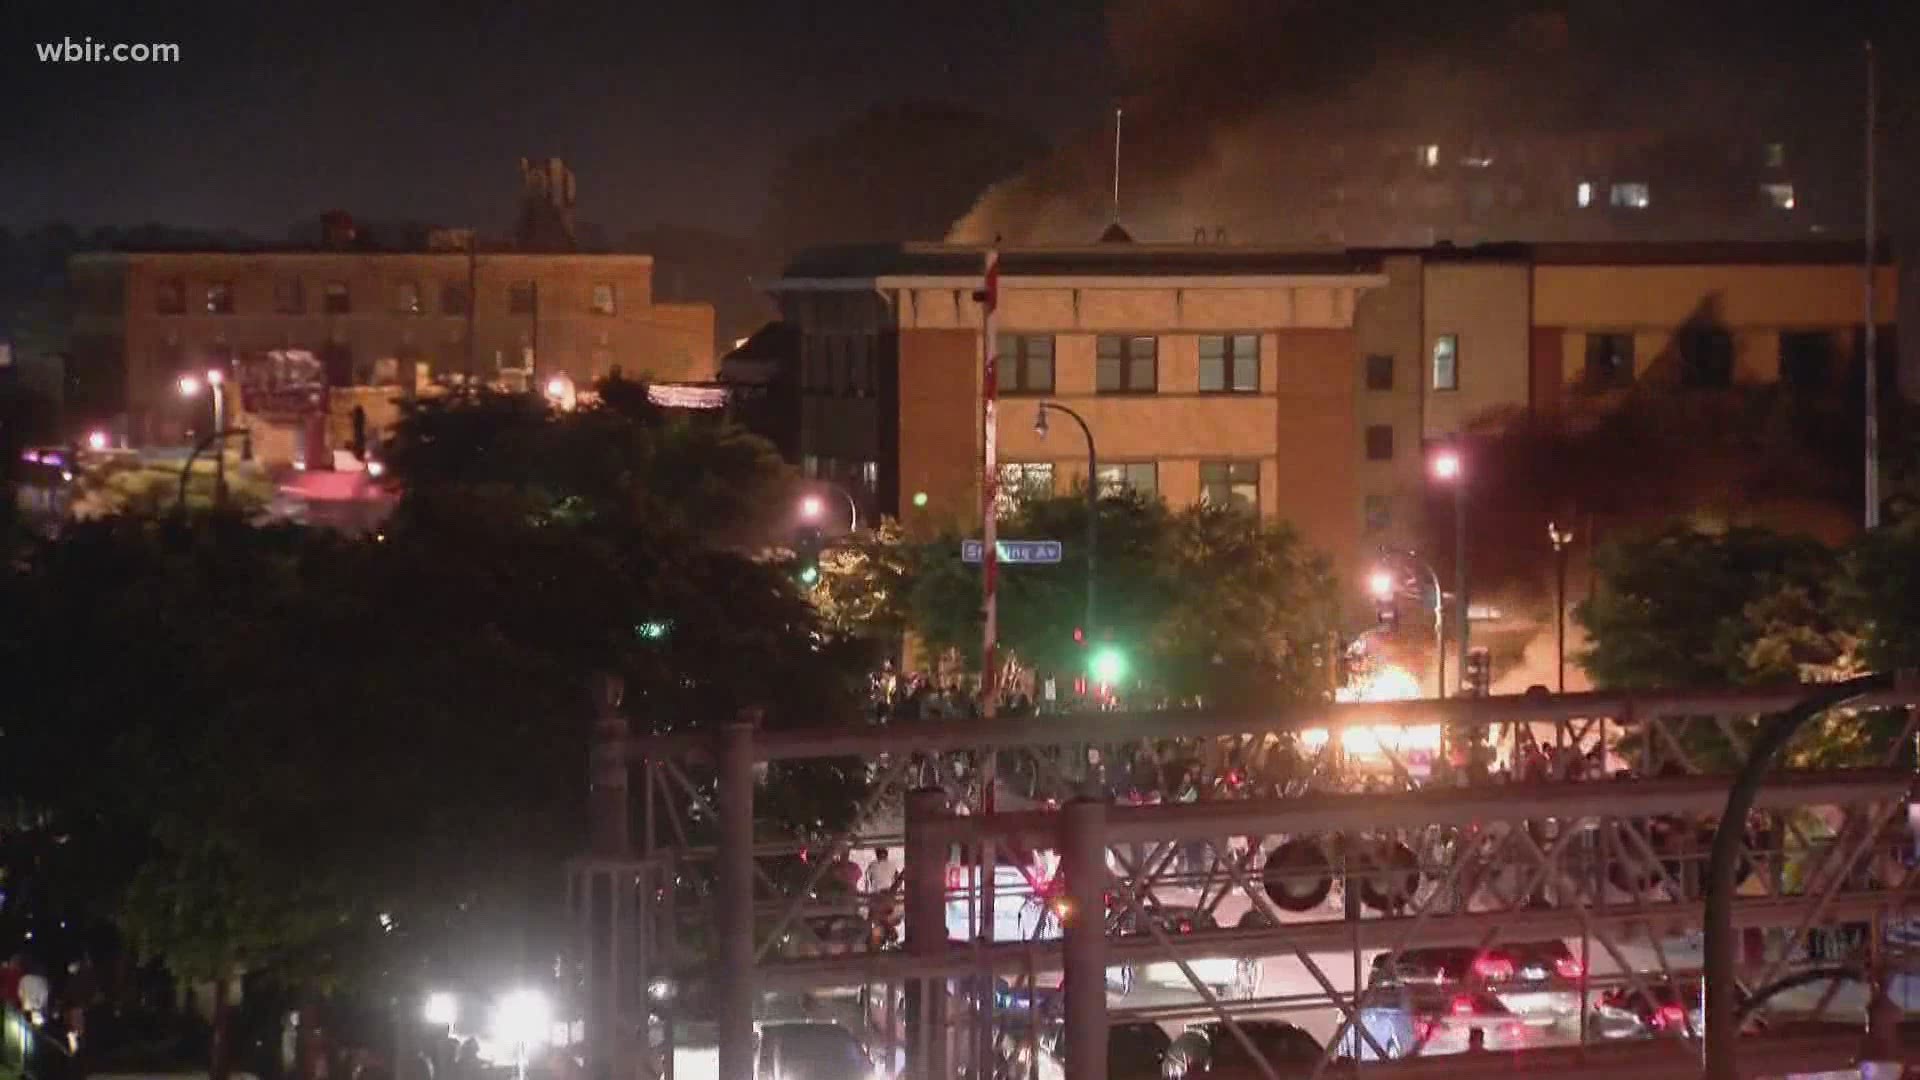 The third precinct police station in Minneapolis is in flames as protests turn violent.